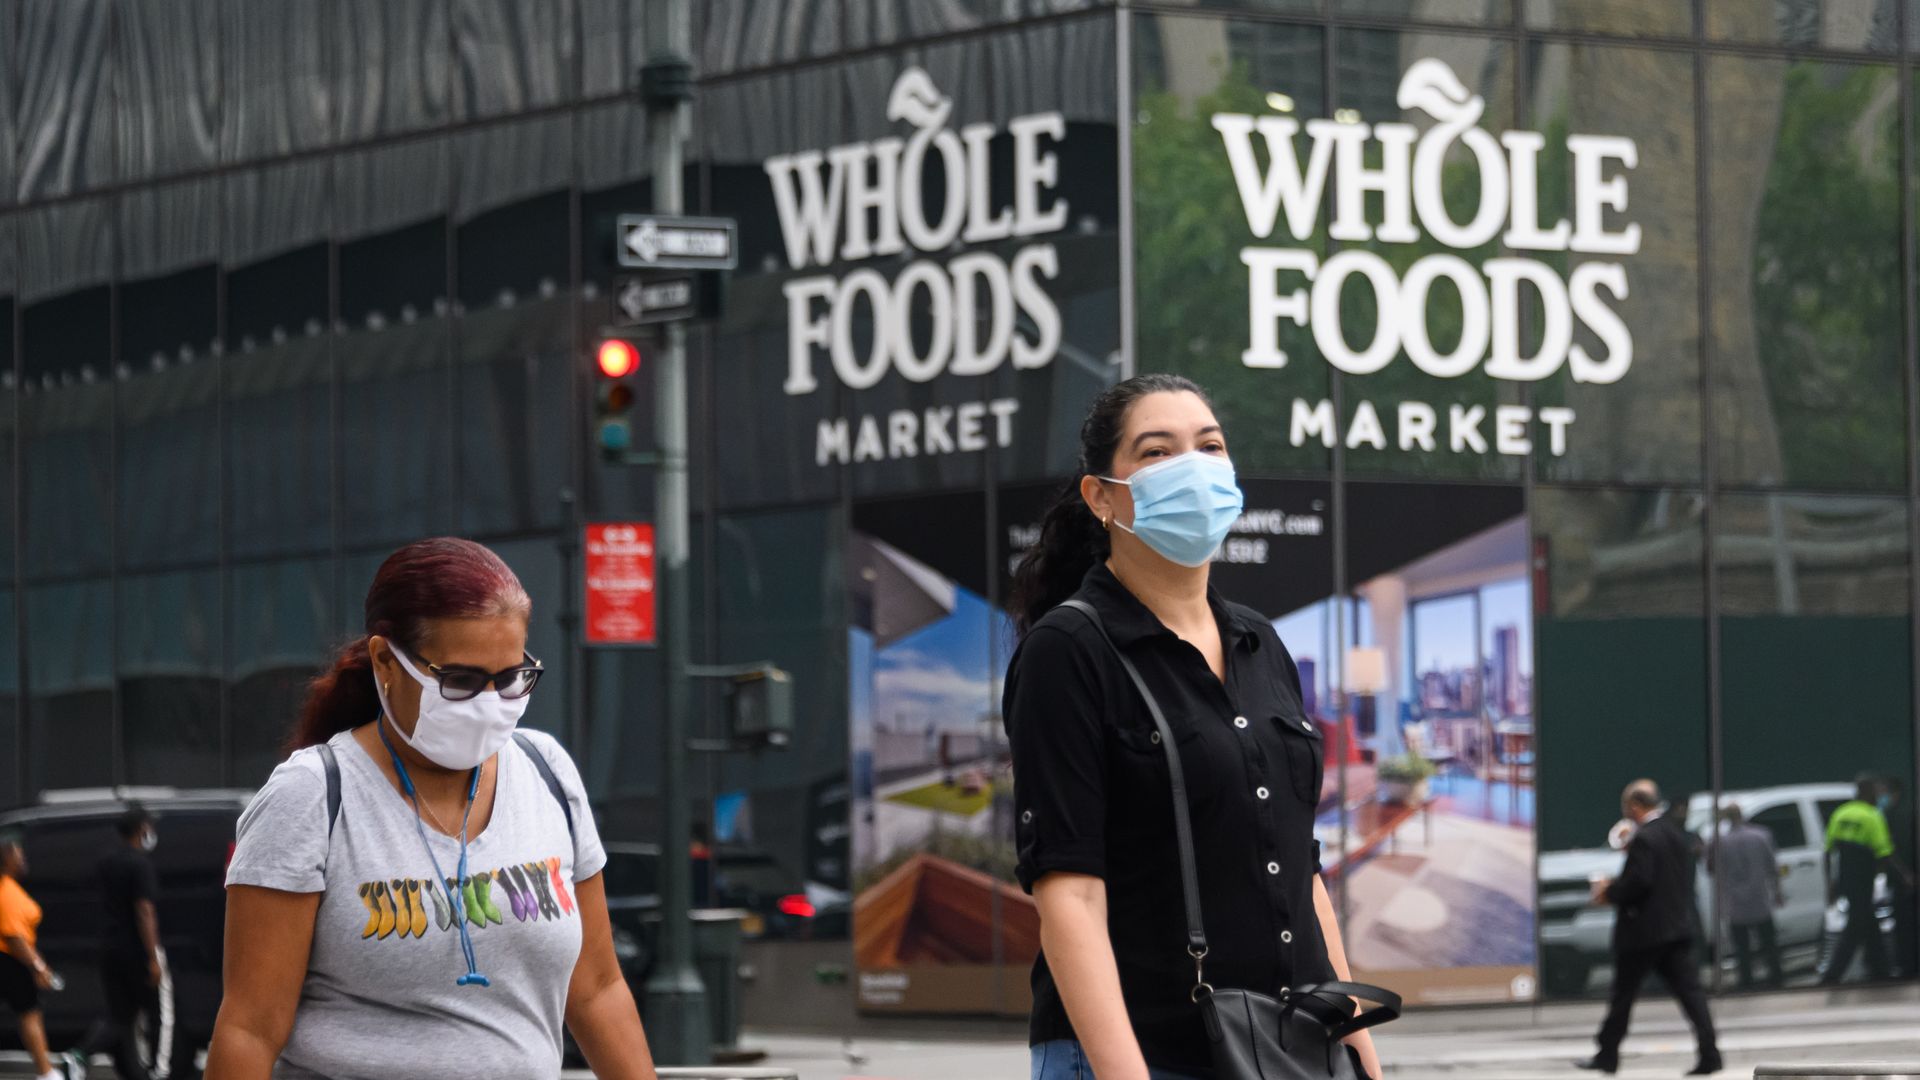 Whole Foods sign on store with two people in the foreground walking with masks on